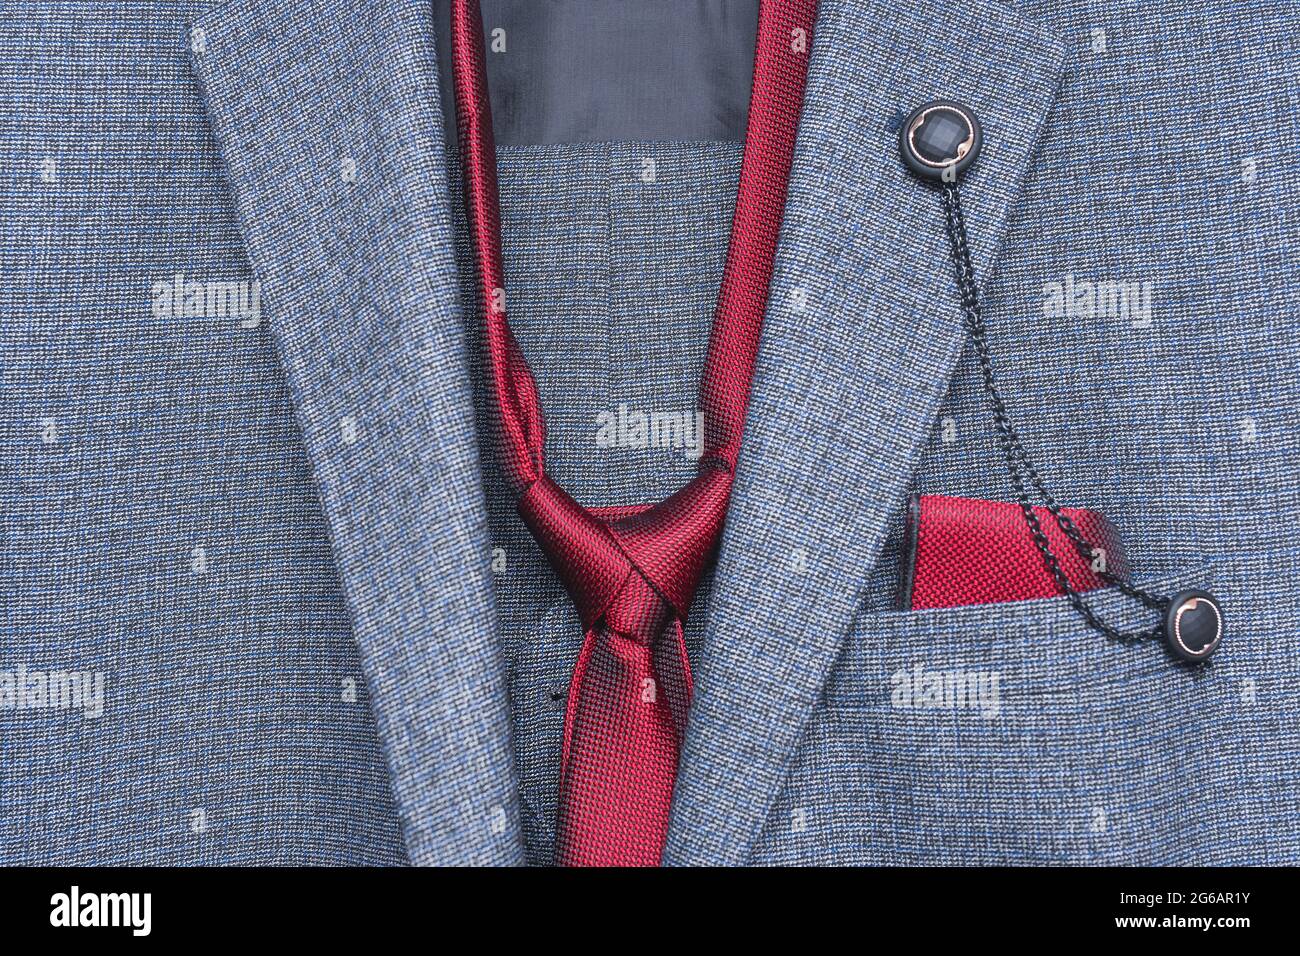 Part or element of a men's suit with a tie and decorative pocket for a napkin with a button close-up. Stock Photo